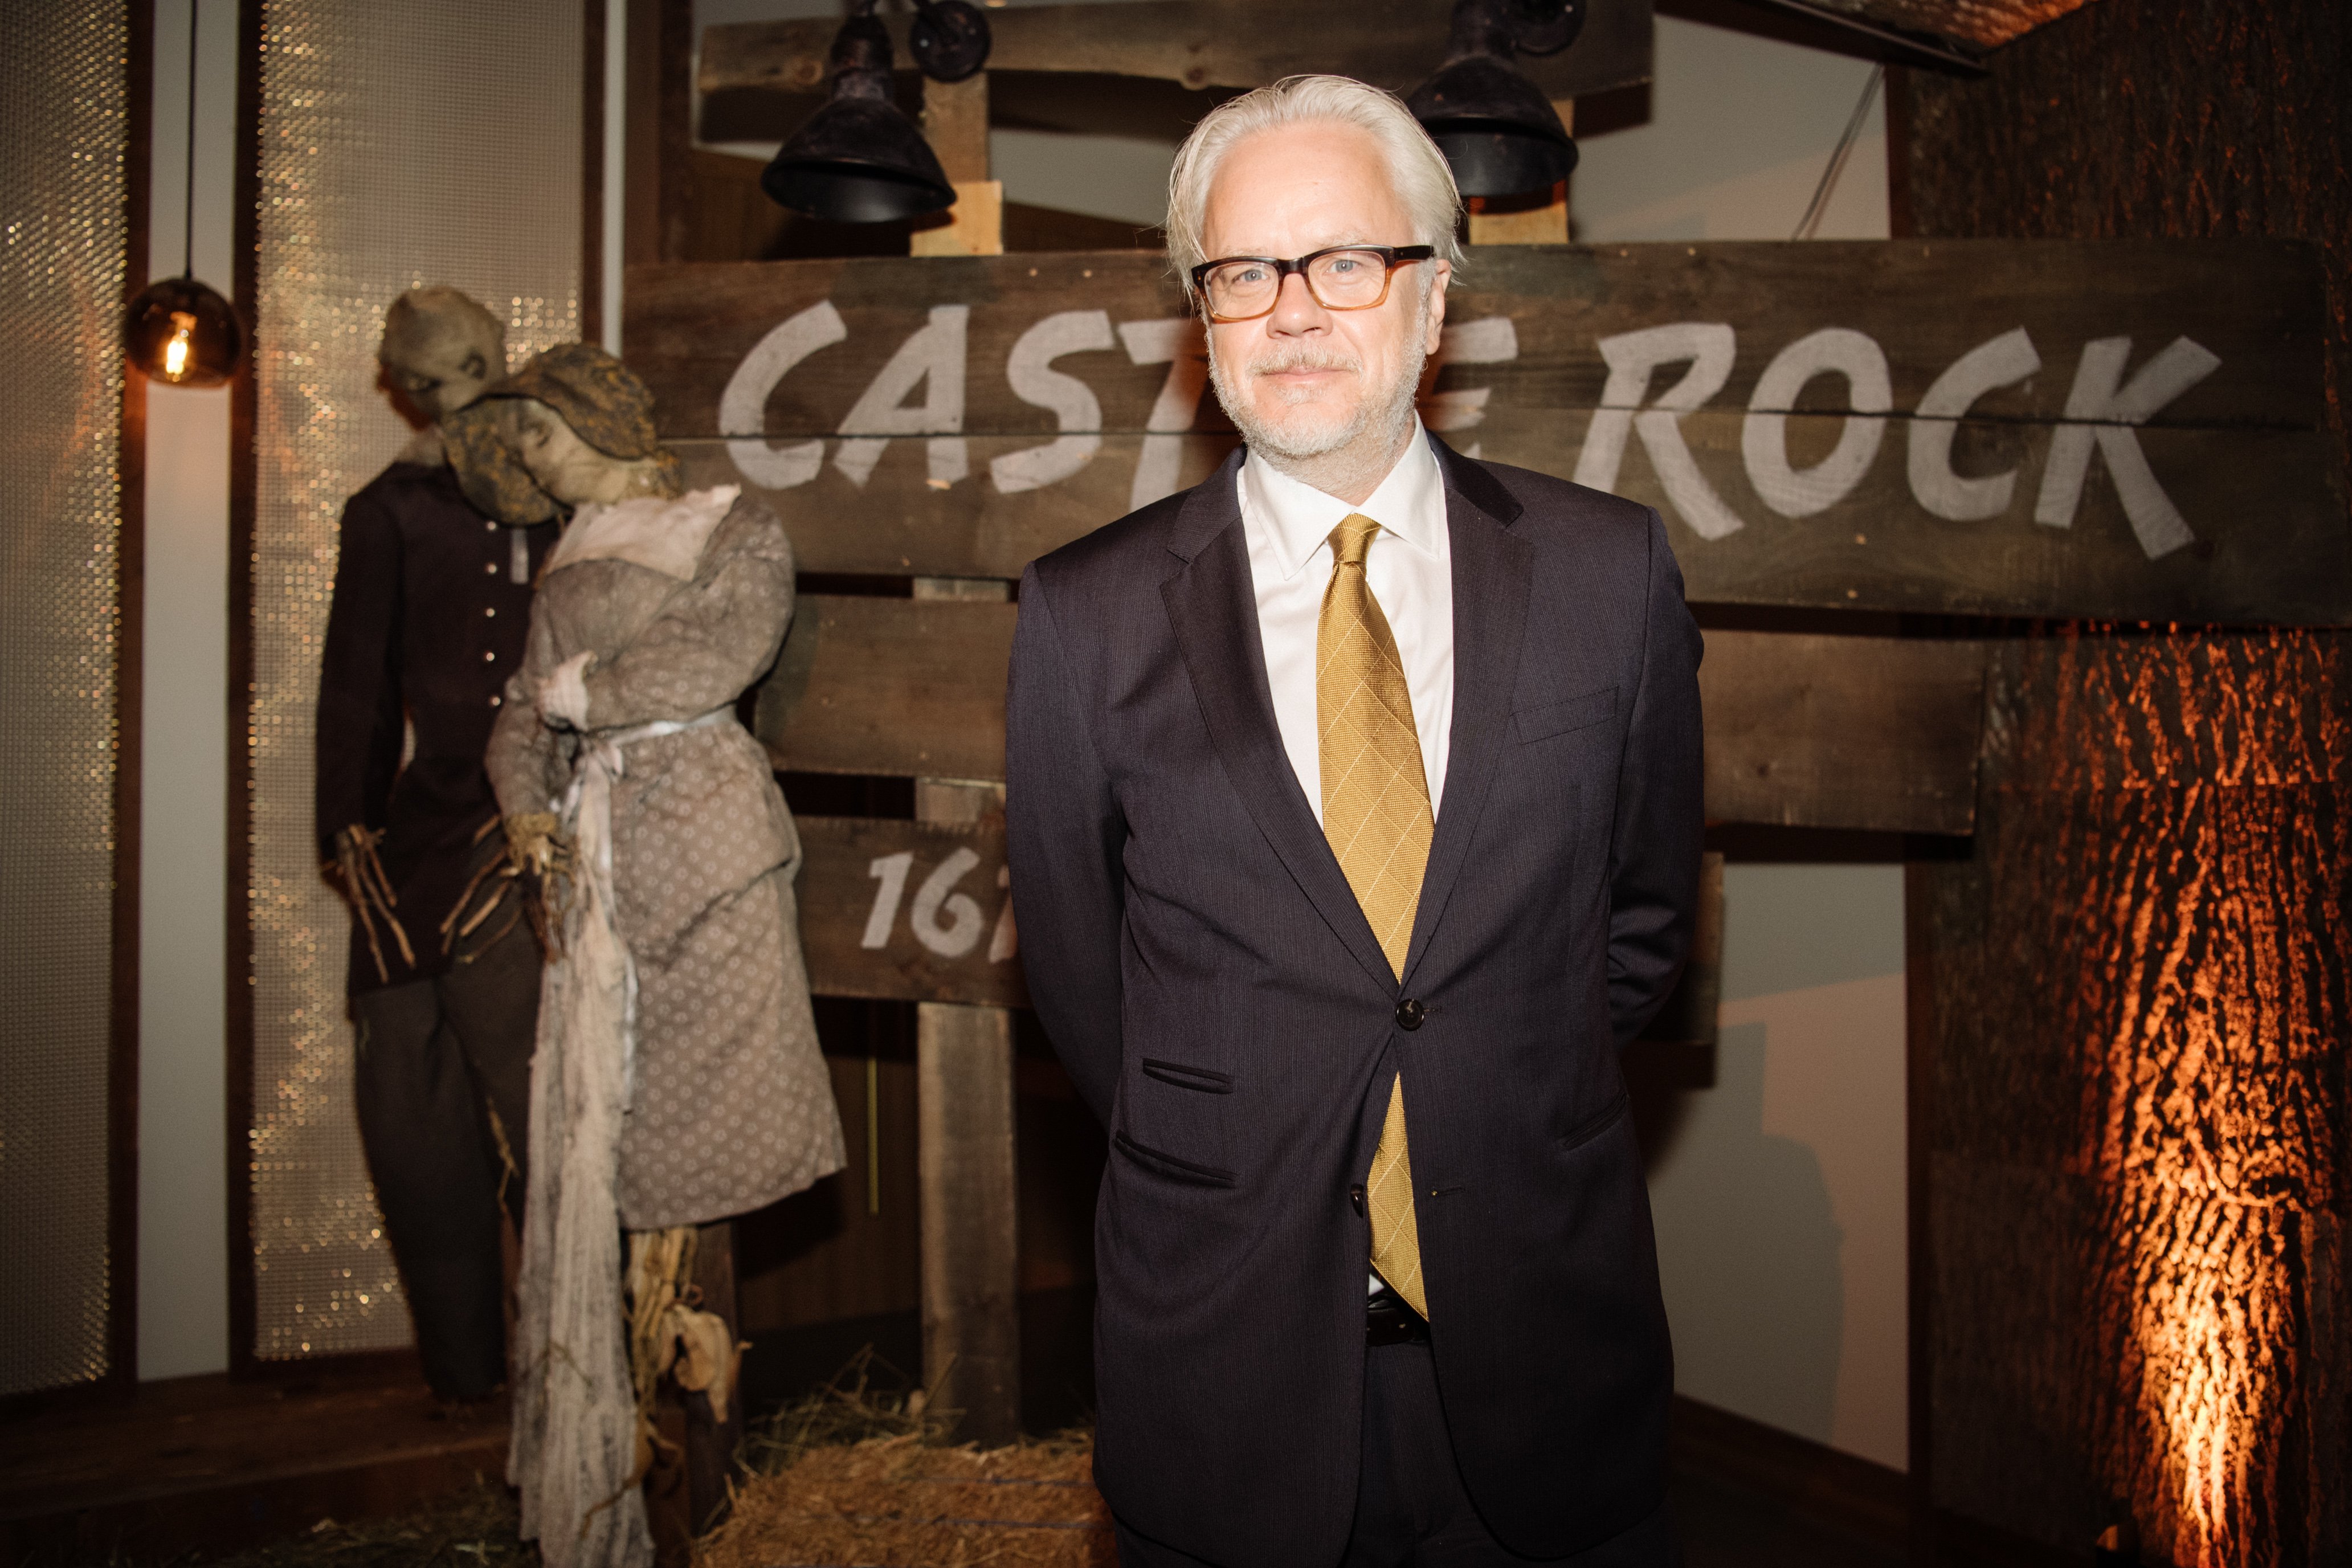 Tim Robbins at the premiere of "Castle Rock" in Los Angeles, October, 2019. | Photo: Getty Images.